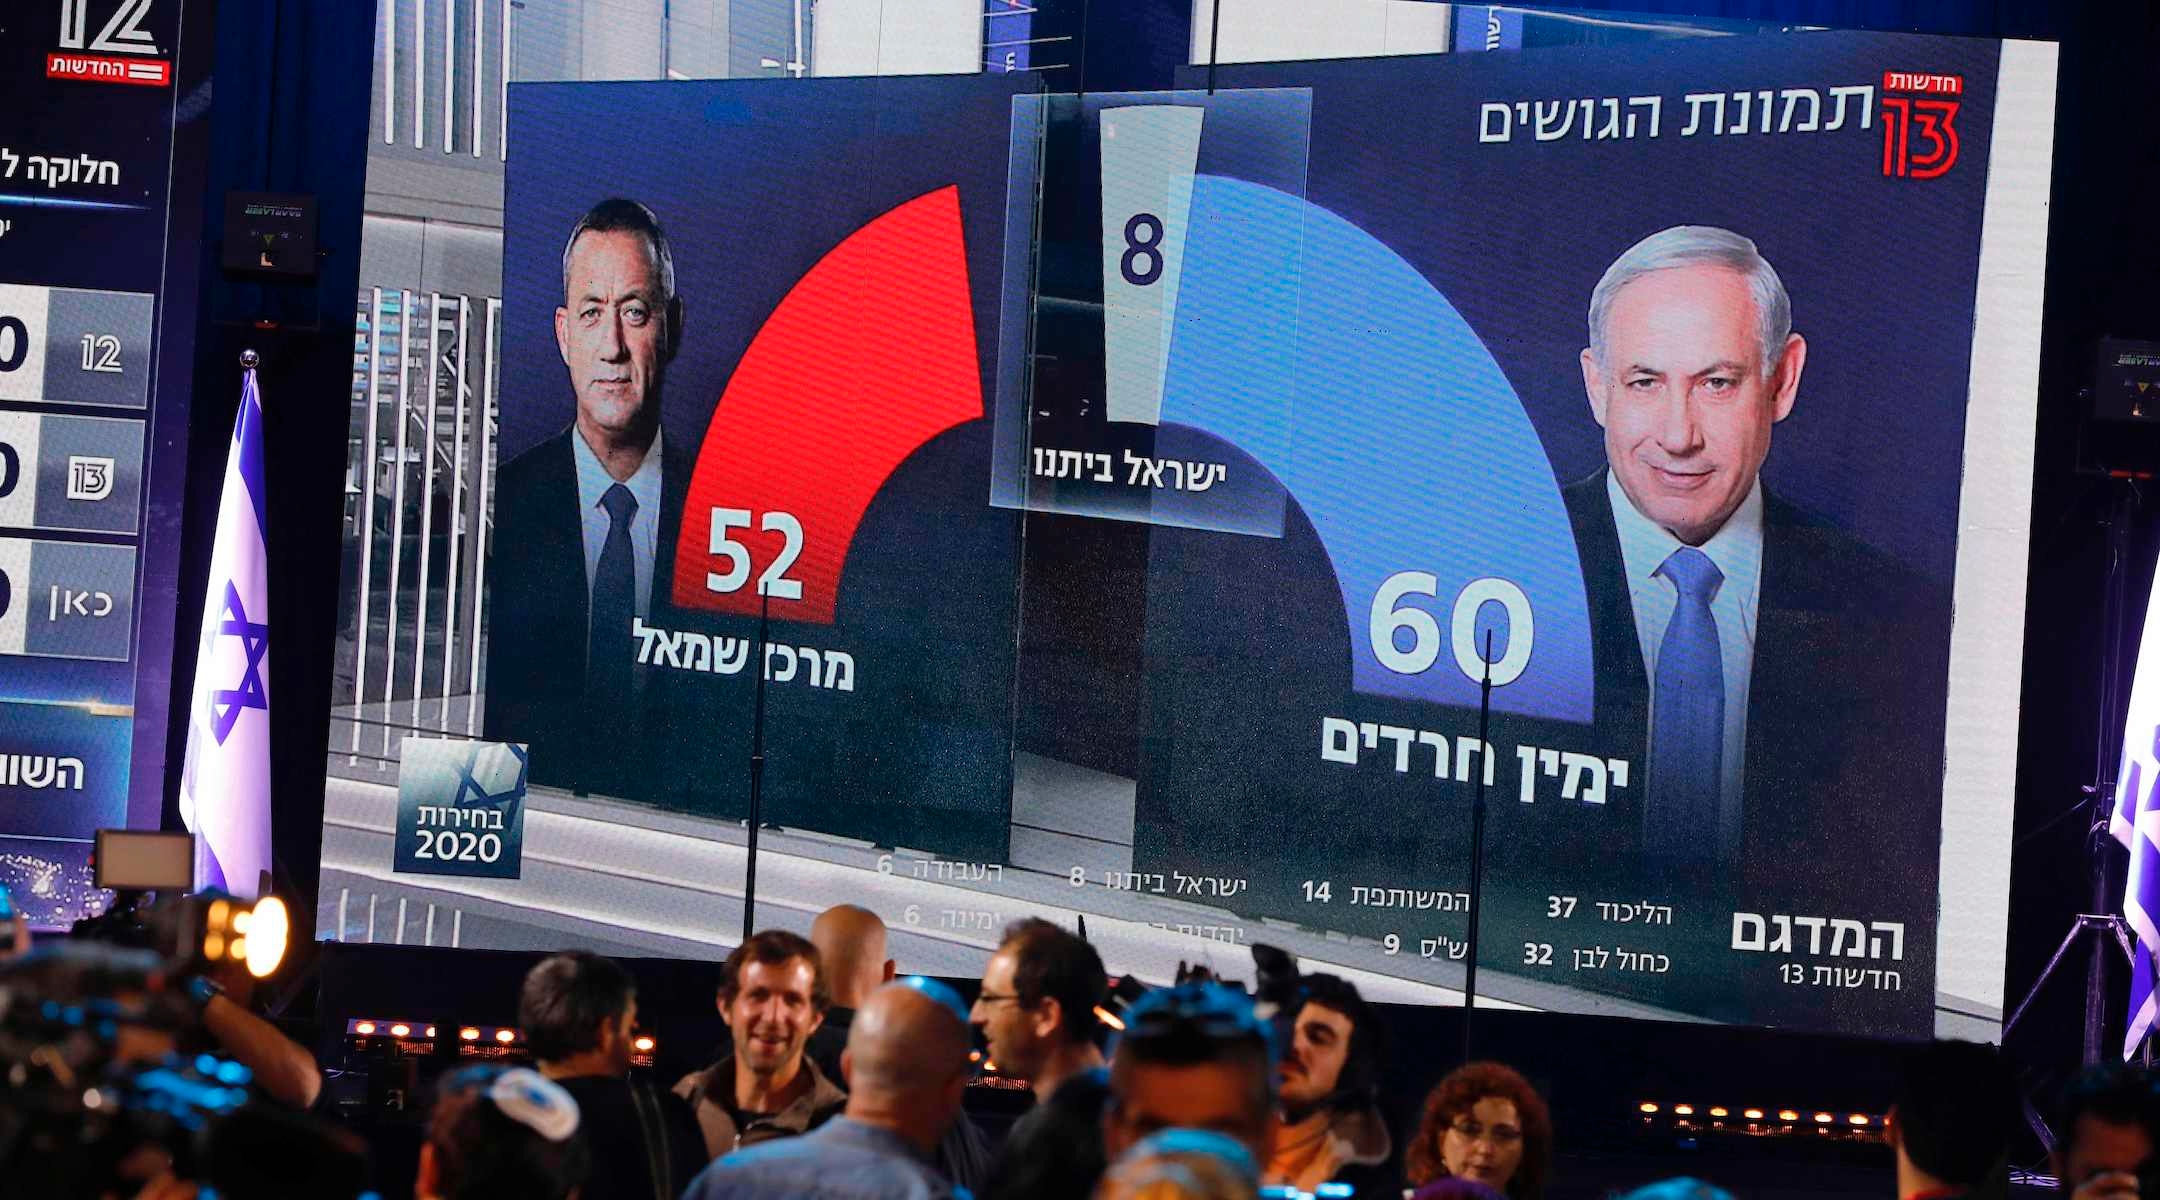 A TV screen broadcasts the exit poll results of the Israeli election in Tel Aviv on March 2, 2020. After more than a year of political deadlock, Benjamin Netanyahu and Benny Gantz have agreed to form a government together. (Menahem Kahana/AFP via Getty Images)